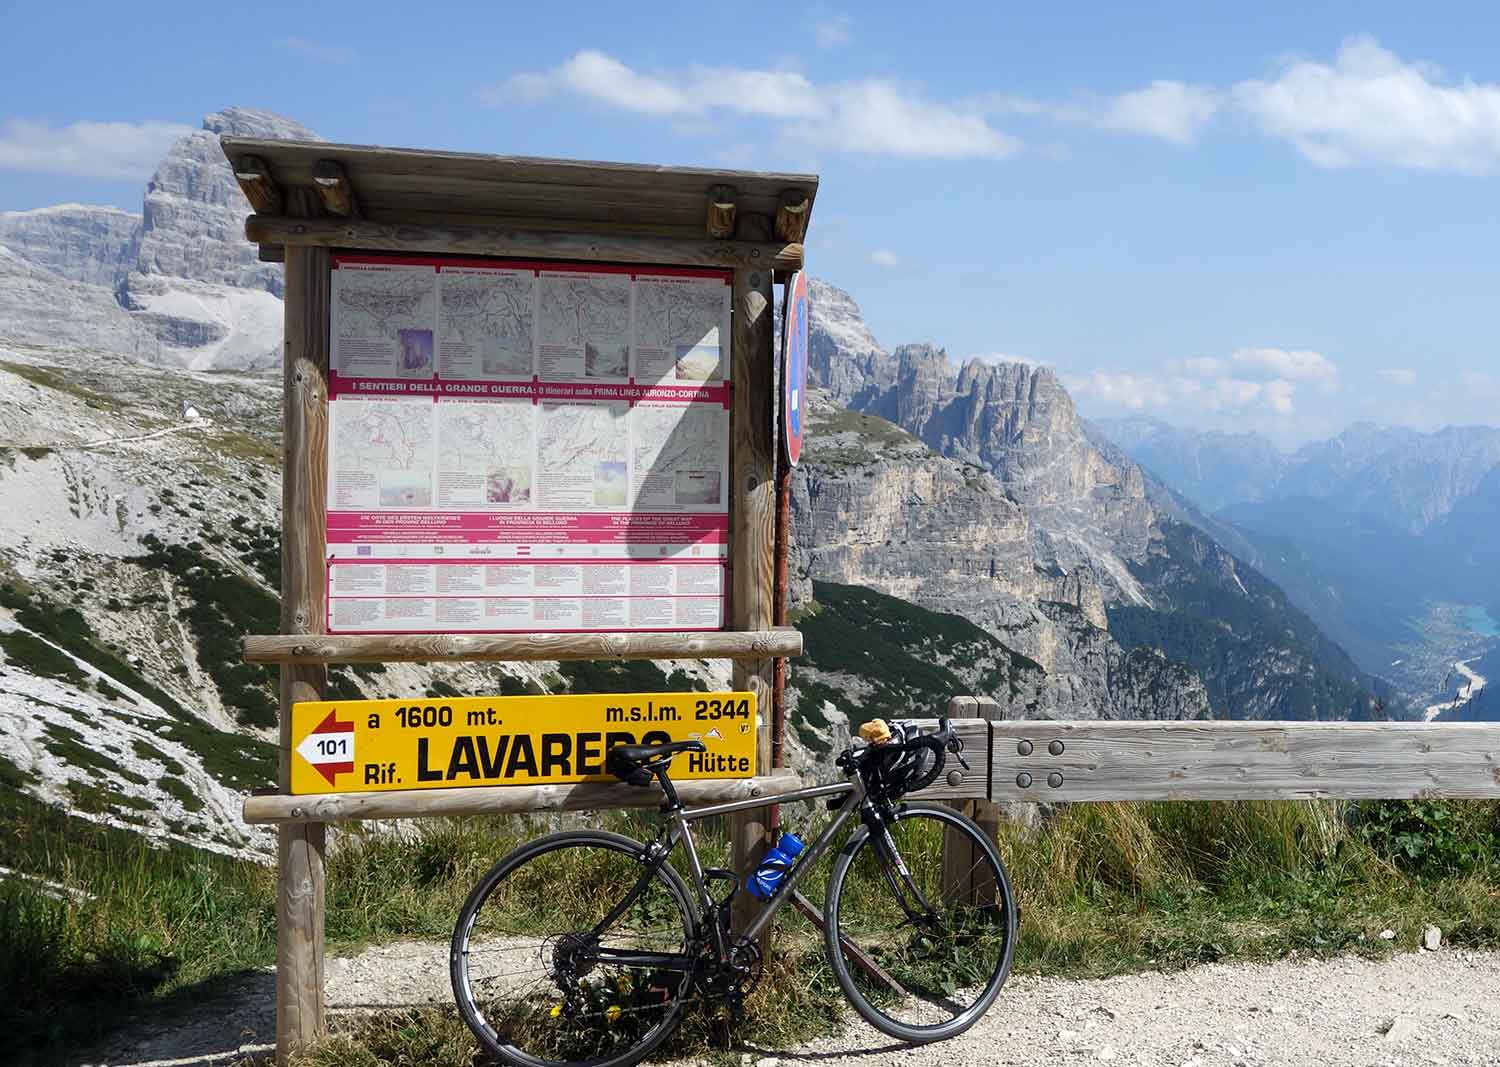 The Ritchey on top of the Lavaredo